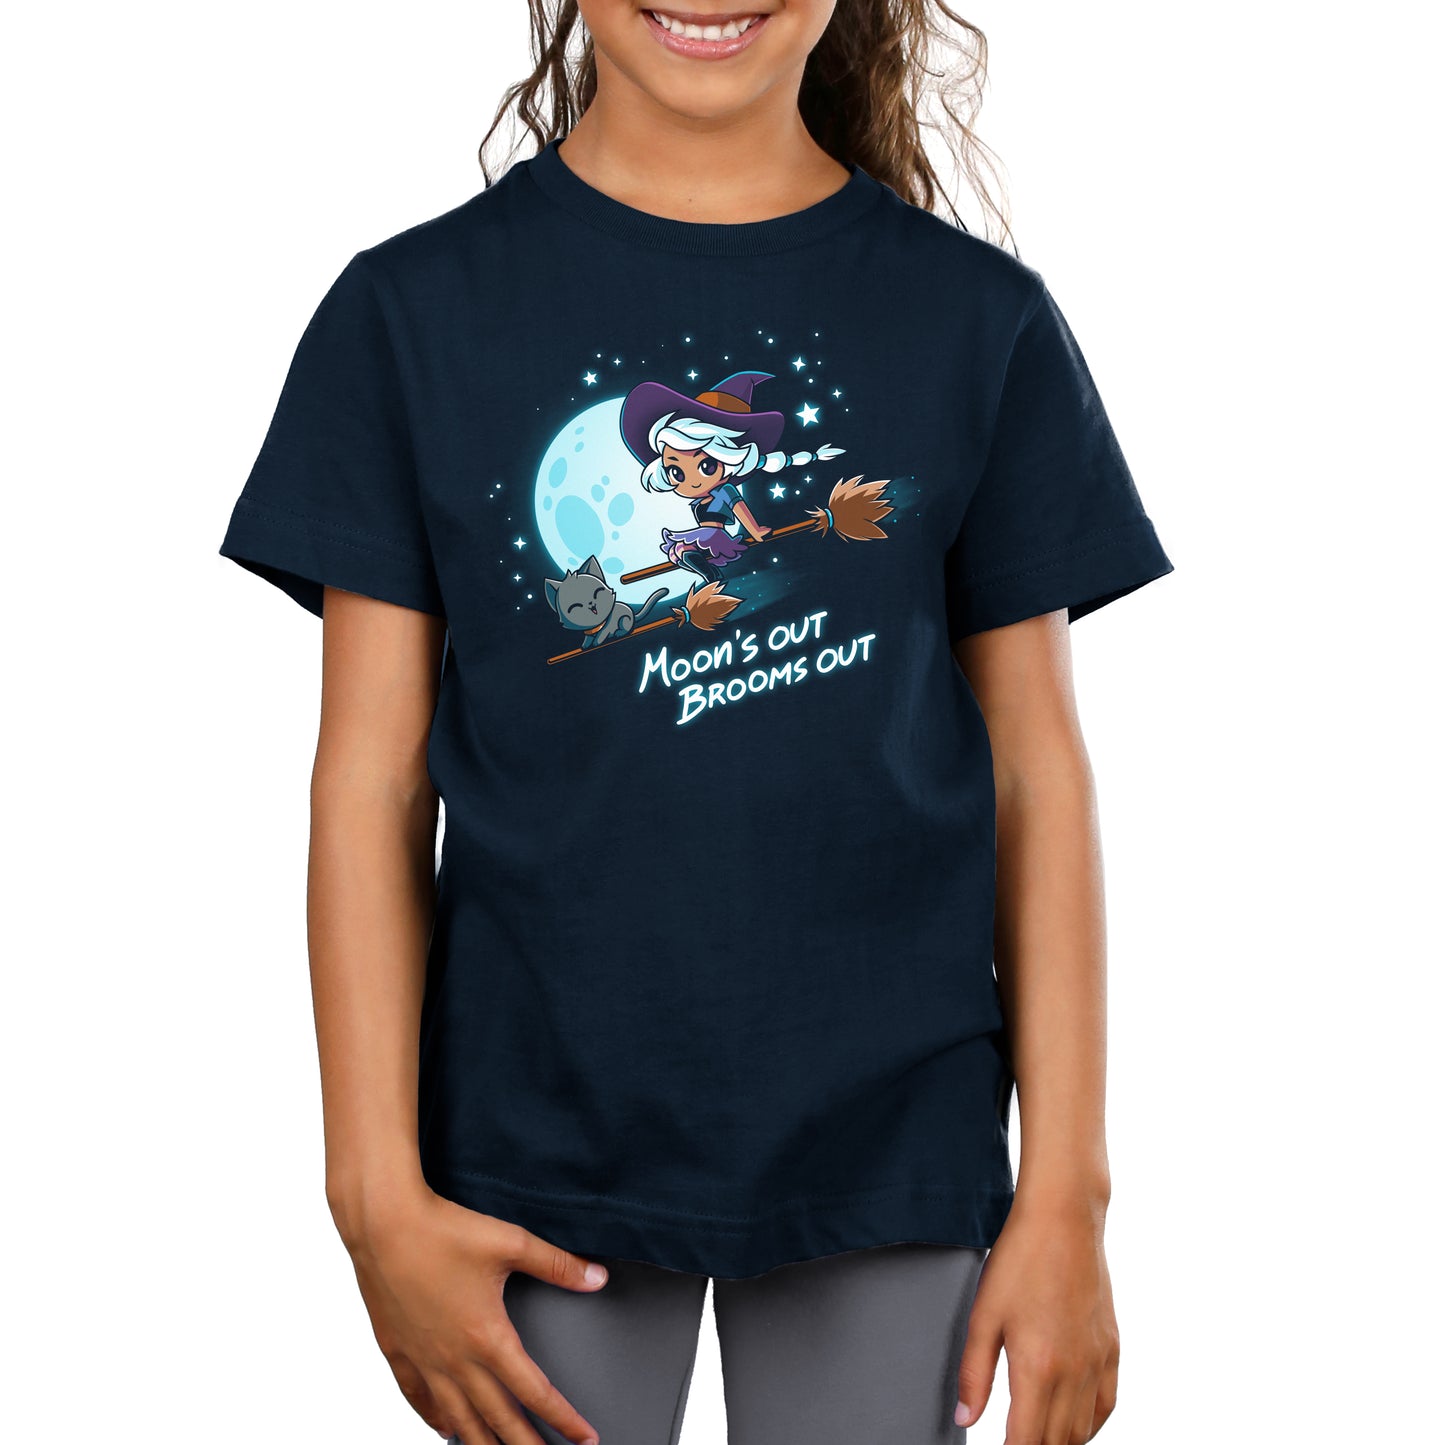 A girl wearing a Moon’s Out Brooms Out t-shirt by TeeTurtle with a witch on it.